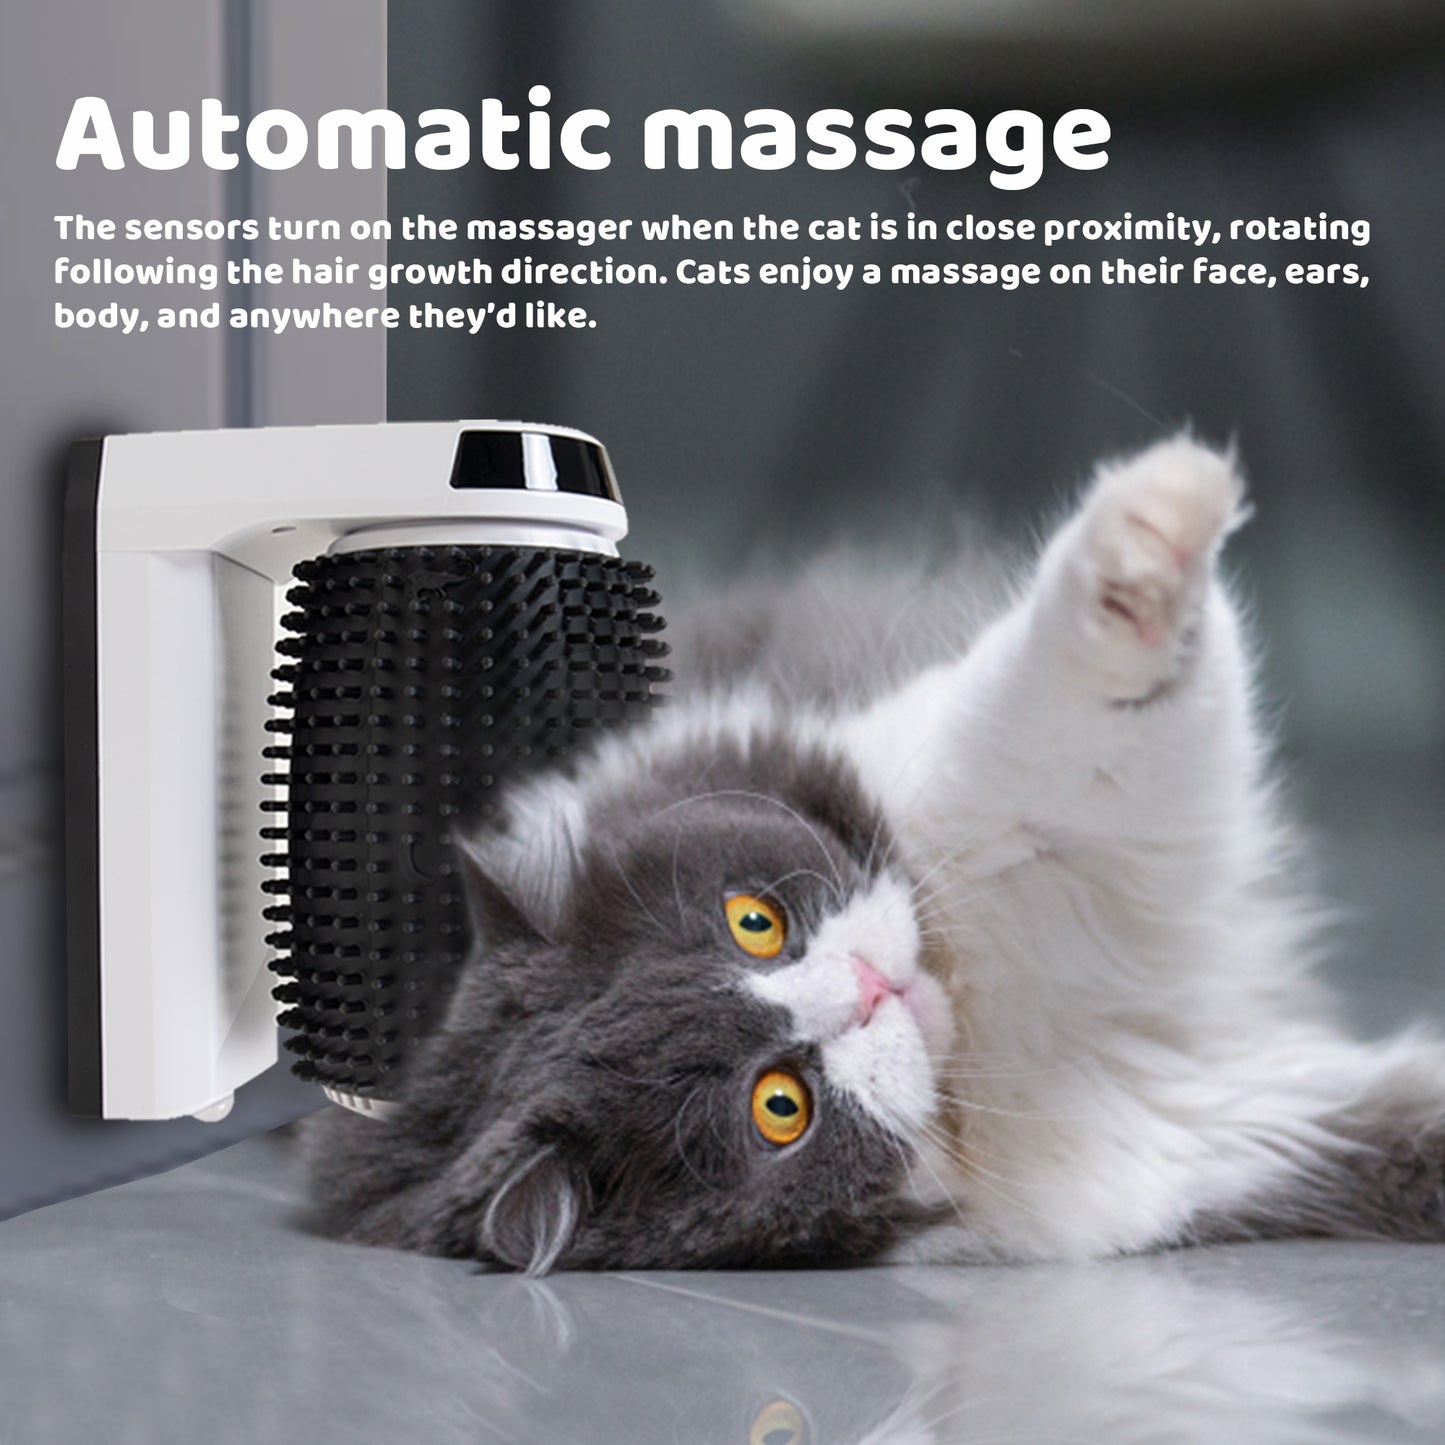 The Automatic Self-Groomer and Massager has sensors that turn on when the cat is in close proximity, rotating following the direction of their hair growth. Cats enjoy a massage on their face, ears, body, and anywhere they'd like.